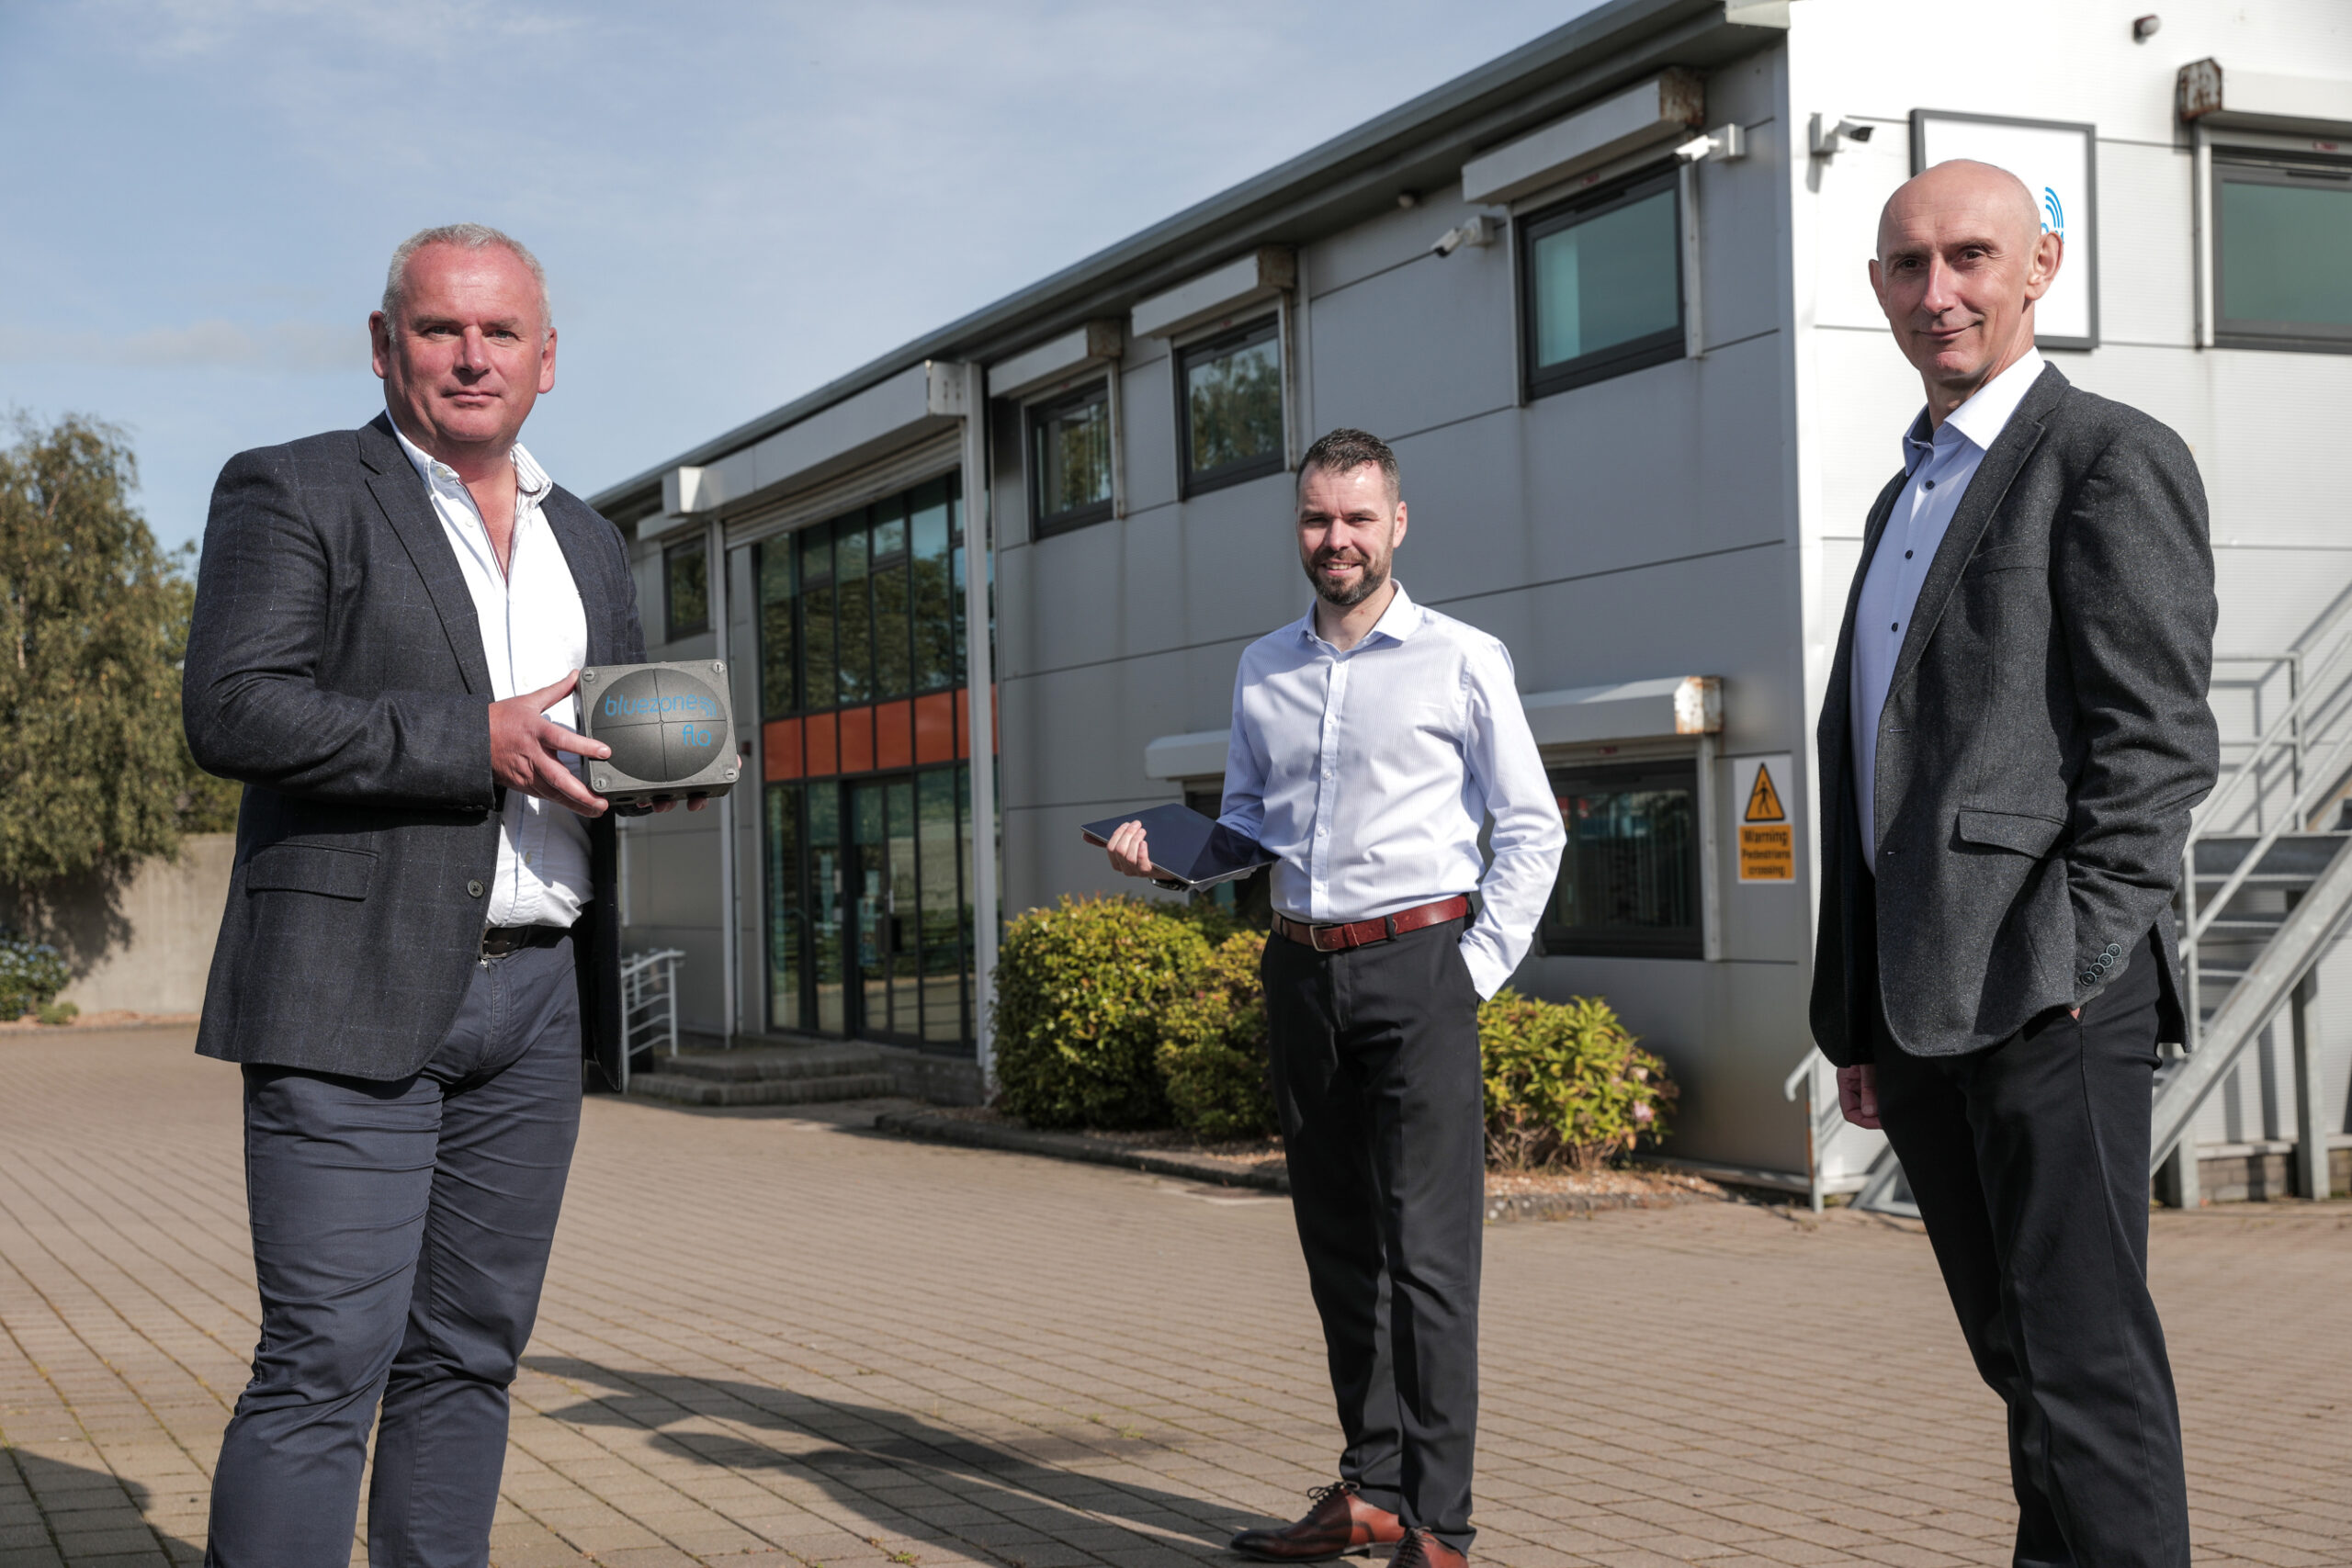 Newry's Bluezone Technologies invests over £685k in sensor technology to combat Legionella outbreaks following Covid-19 lockdown - Newry business news